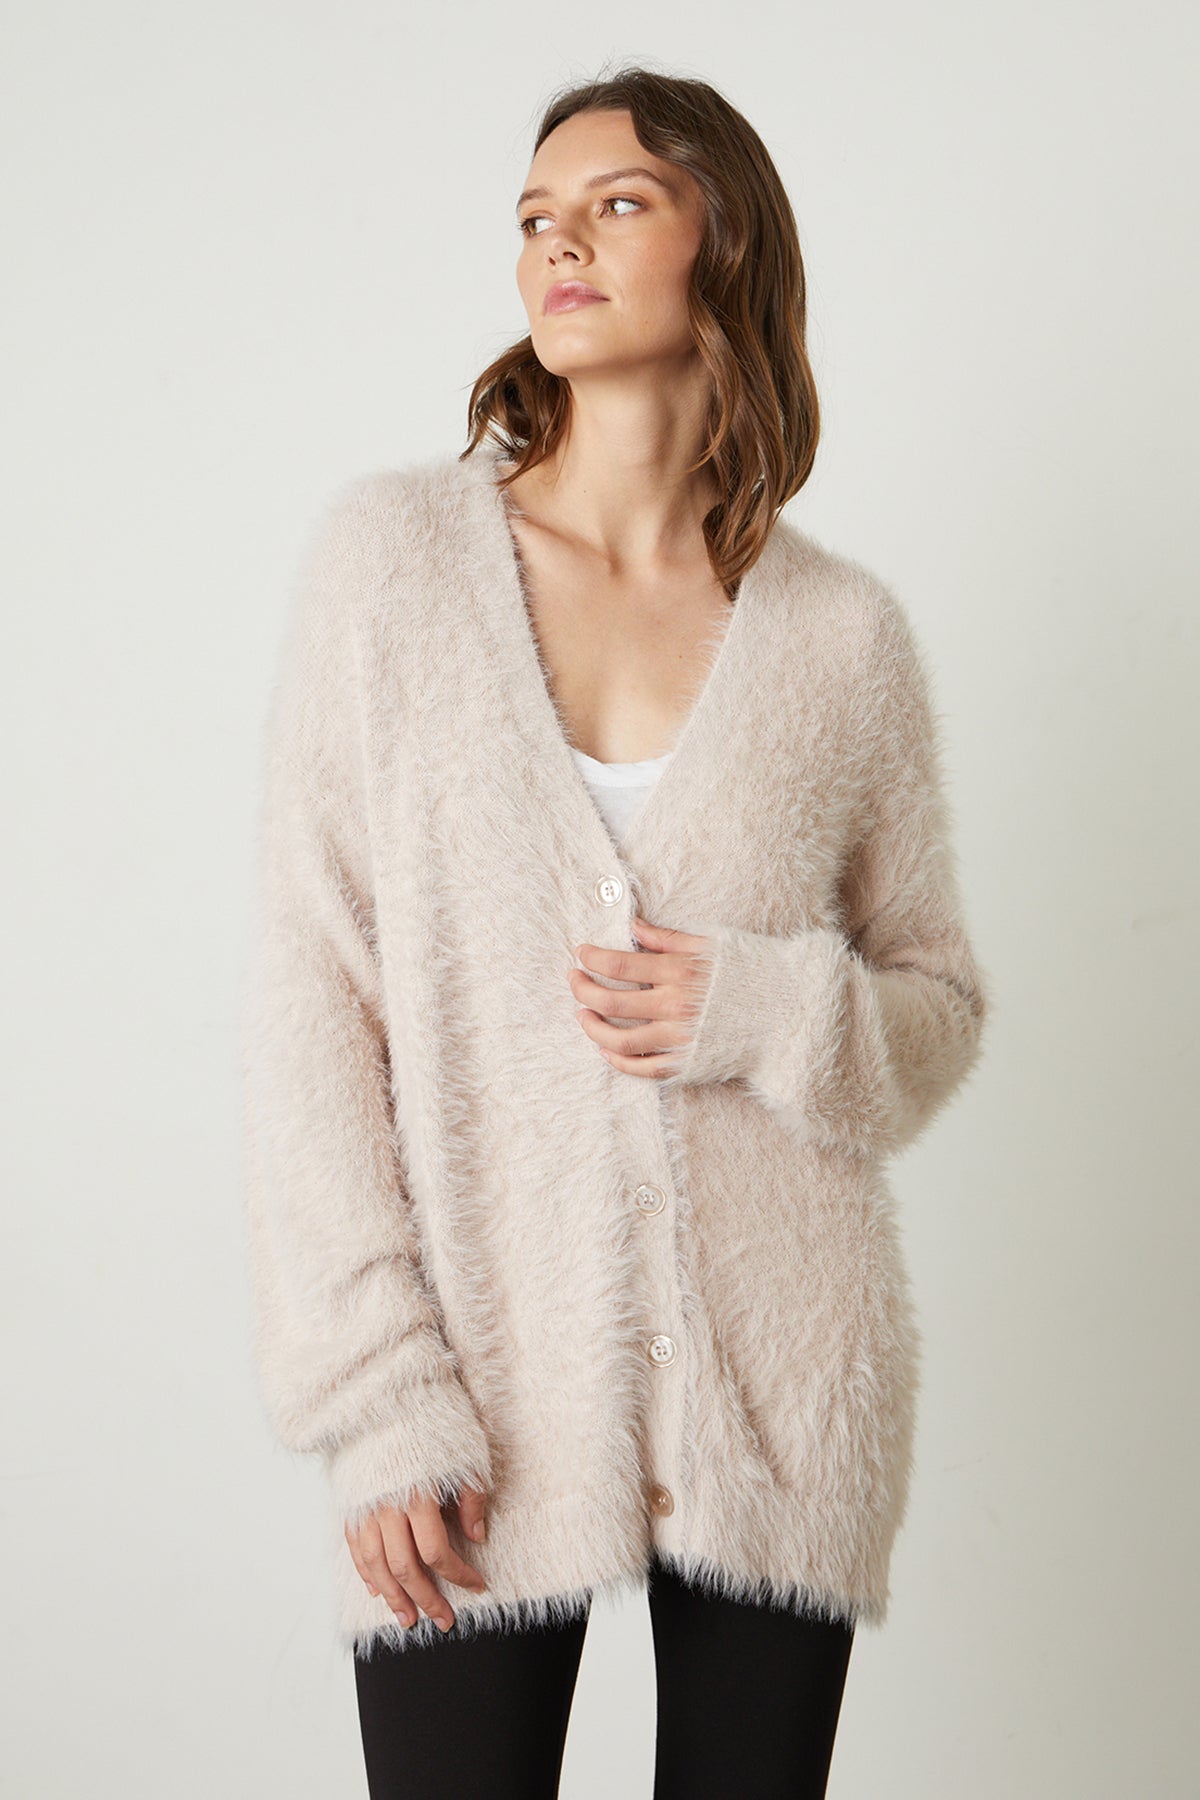  Barb Feather Yarn Button Front Cardigan in pale blush pink front-25985016824001